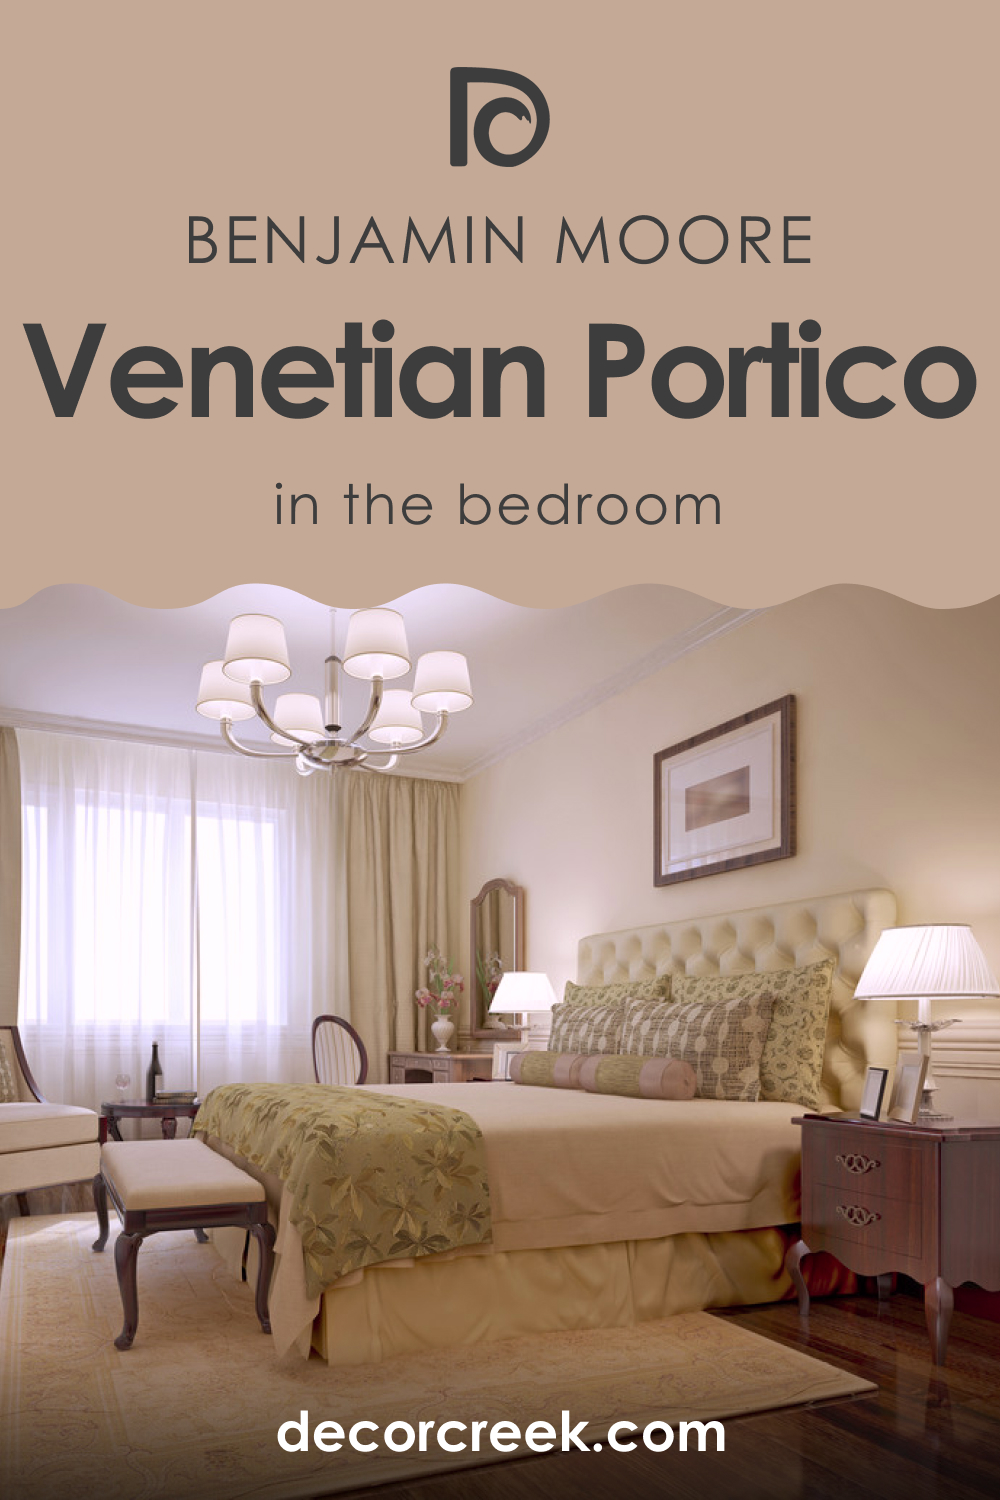 How to Use Venetian Portico AF-185 in the Bedroom?